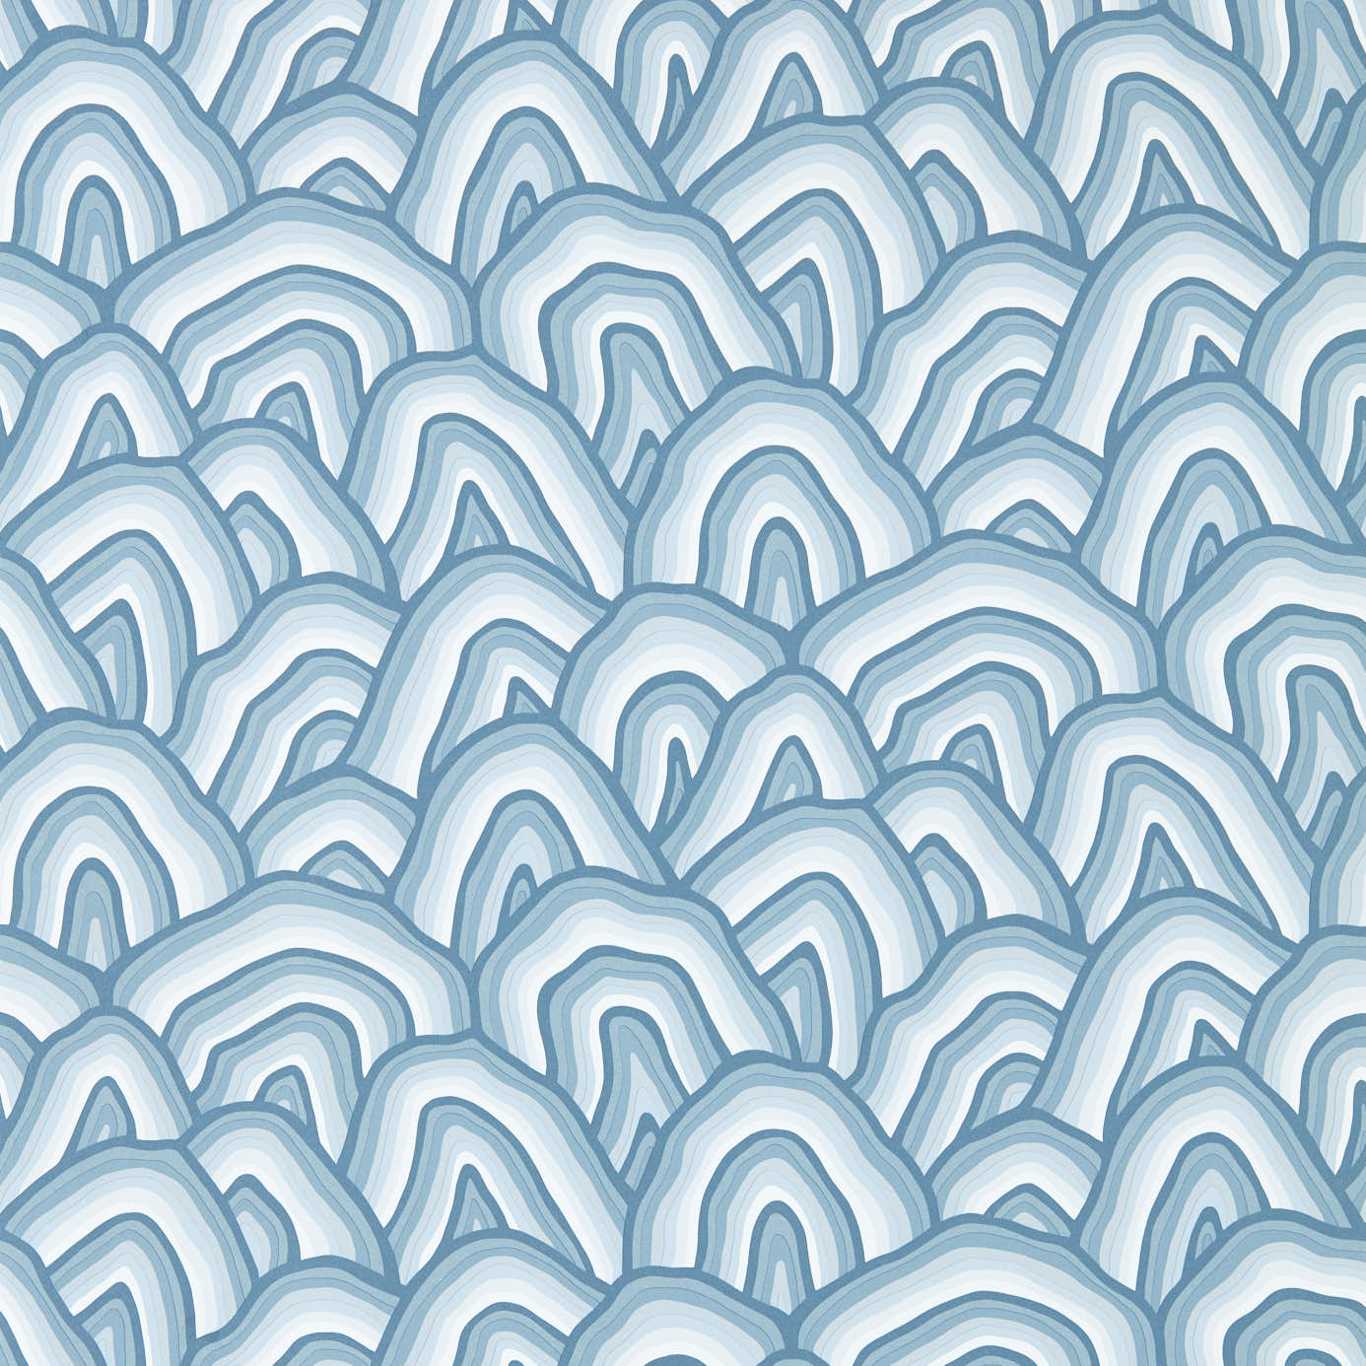 Kumo Wild Water/Exhale Wallpaper HQN3112928 by Harlequin